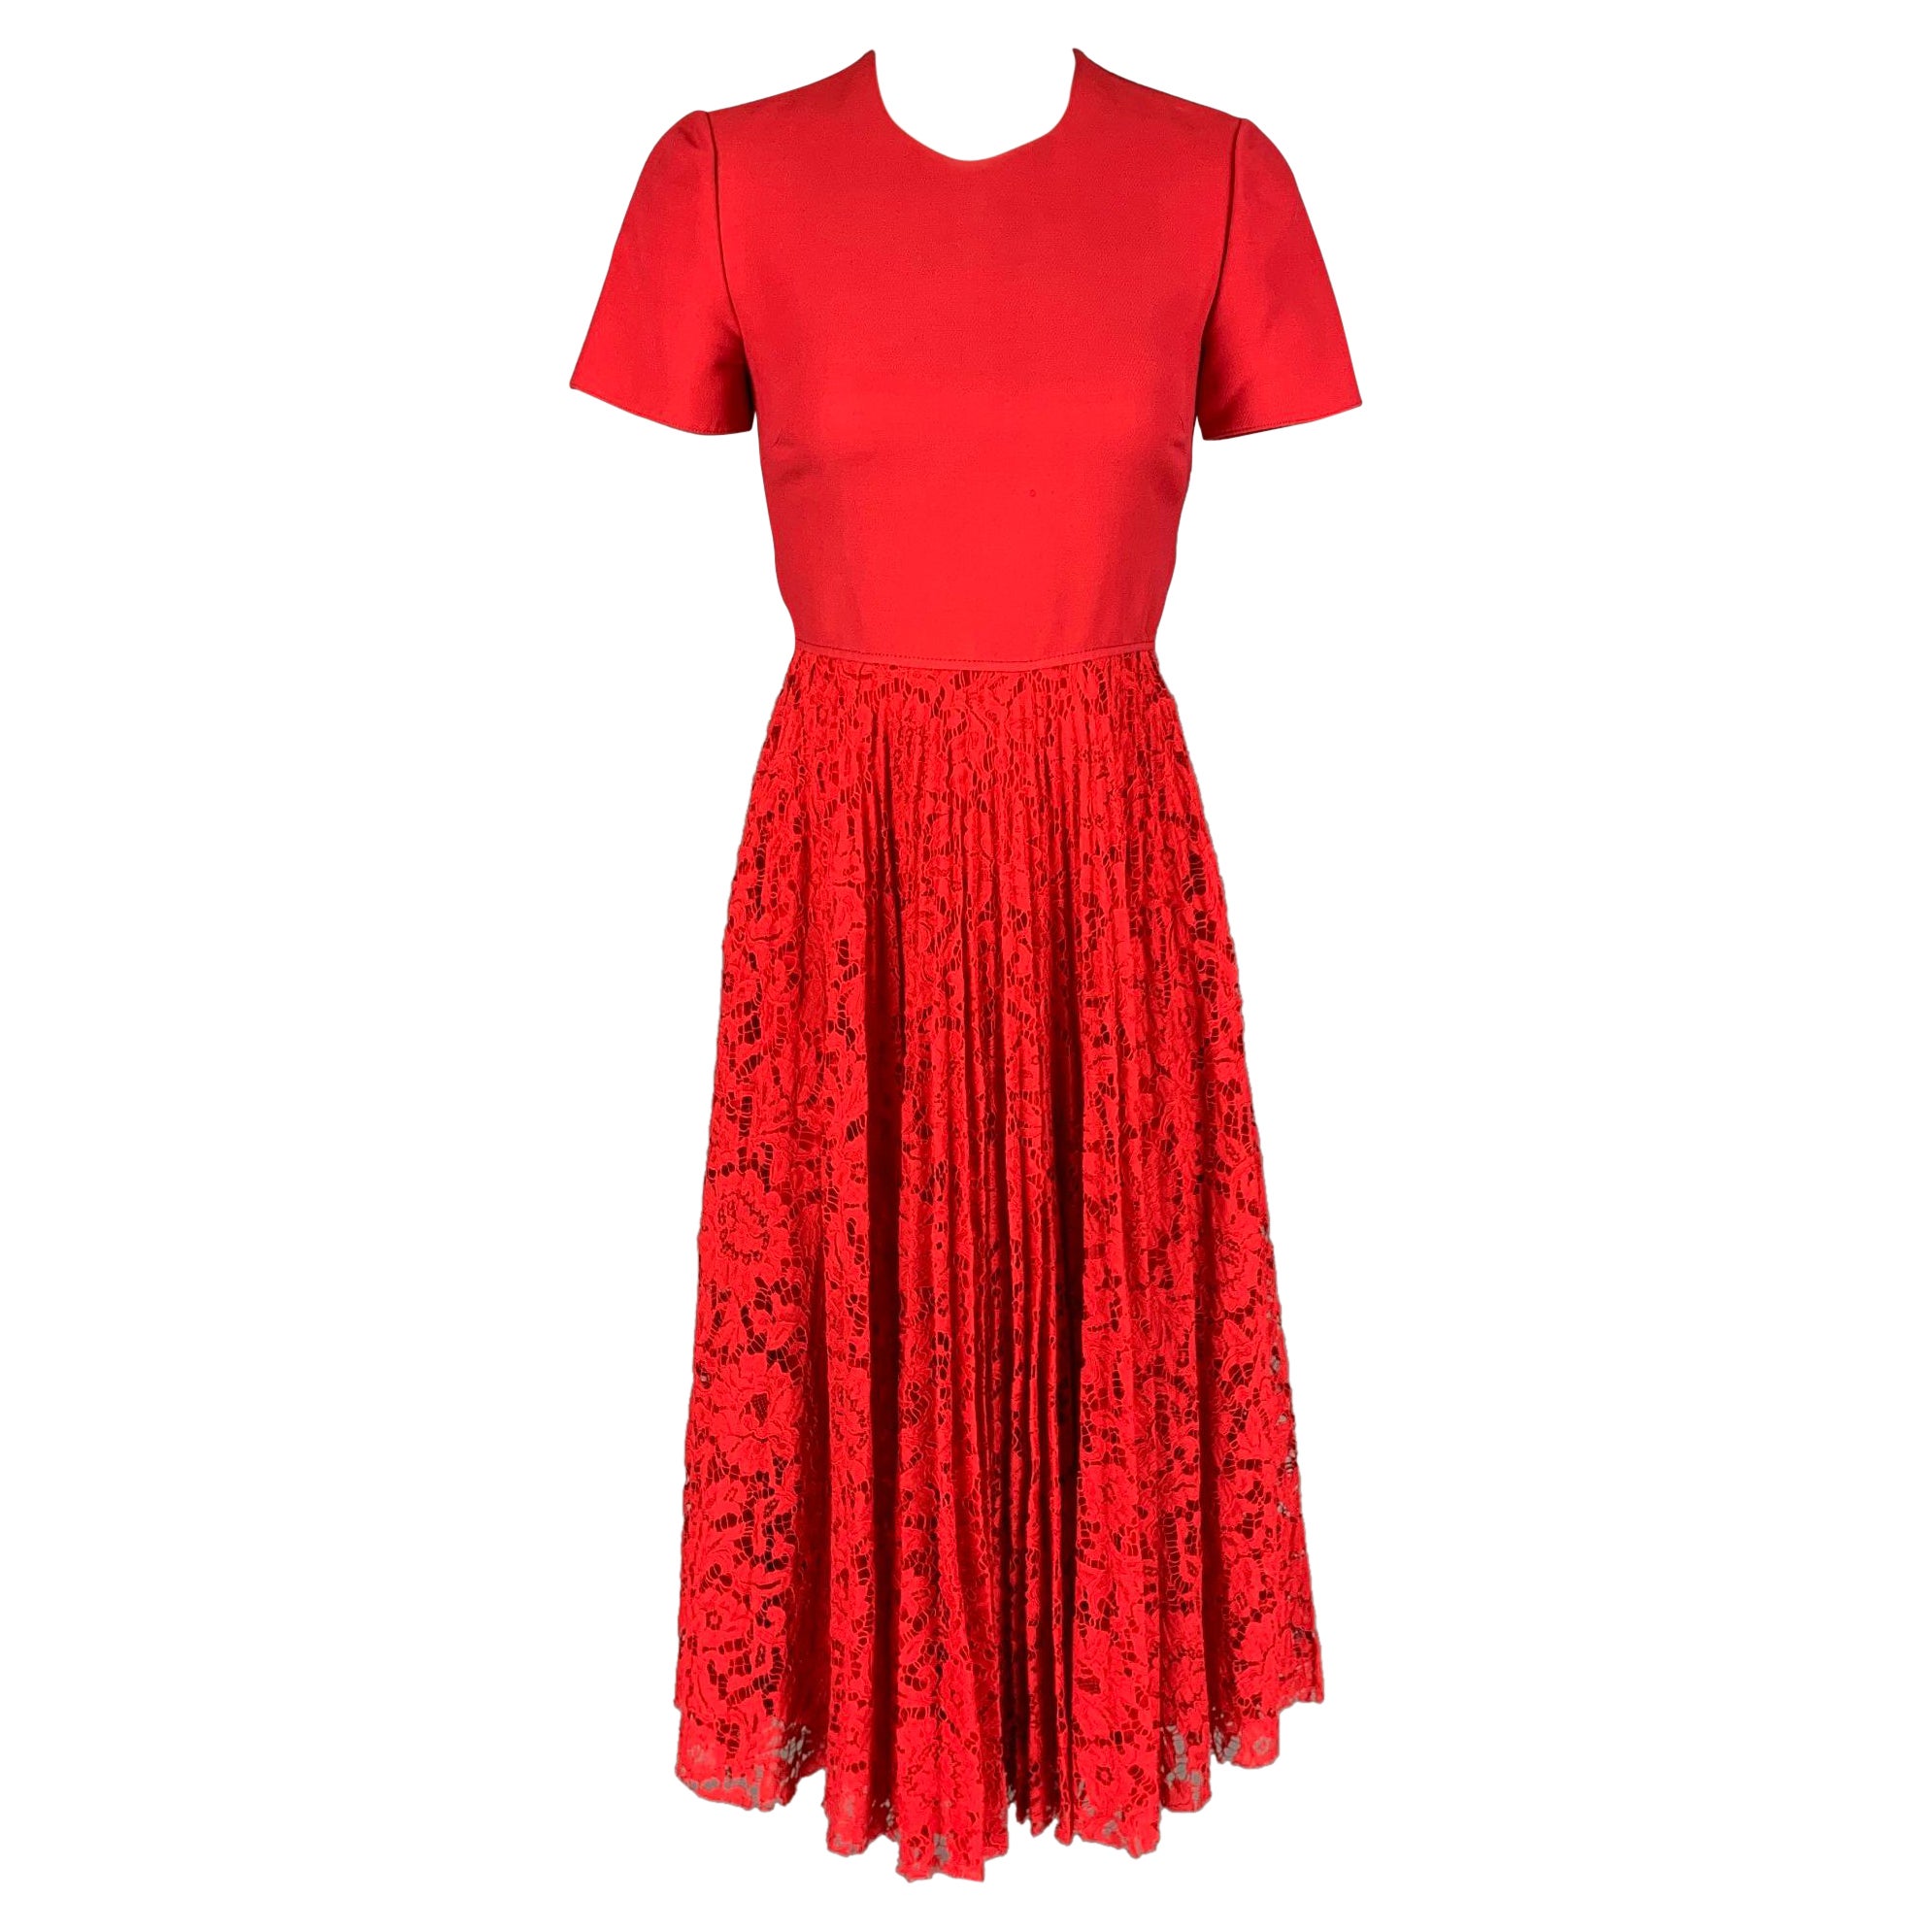 VALENTINO Pre-Fall 19 Size 0 Red Viscose Blend Lace Pleated Dress